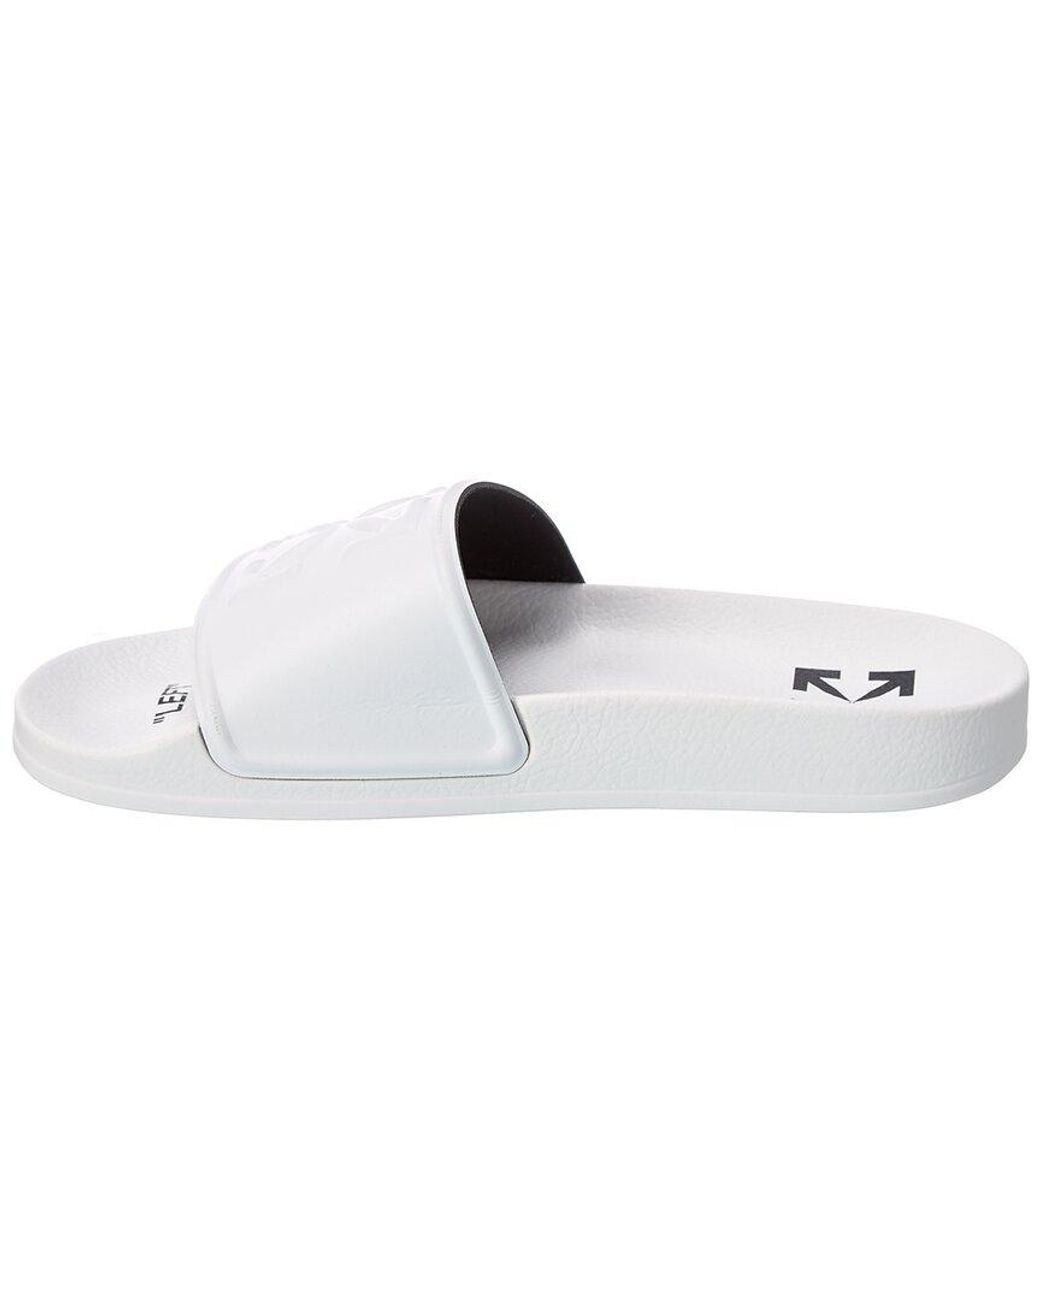 Off-White c/o Virgil Abloh Arrows Rubber Pool Slide in White - Save 42% |  Lyst